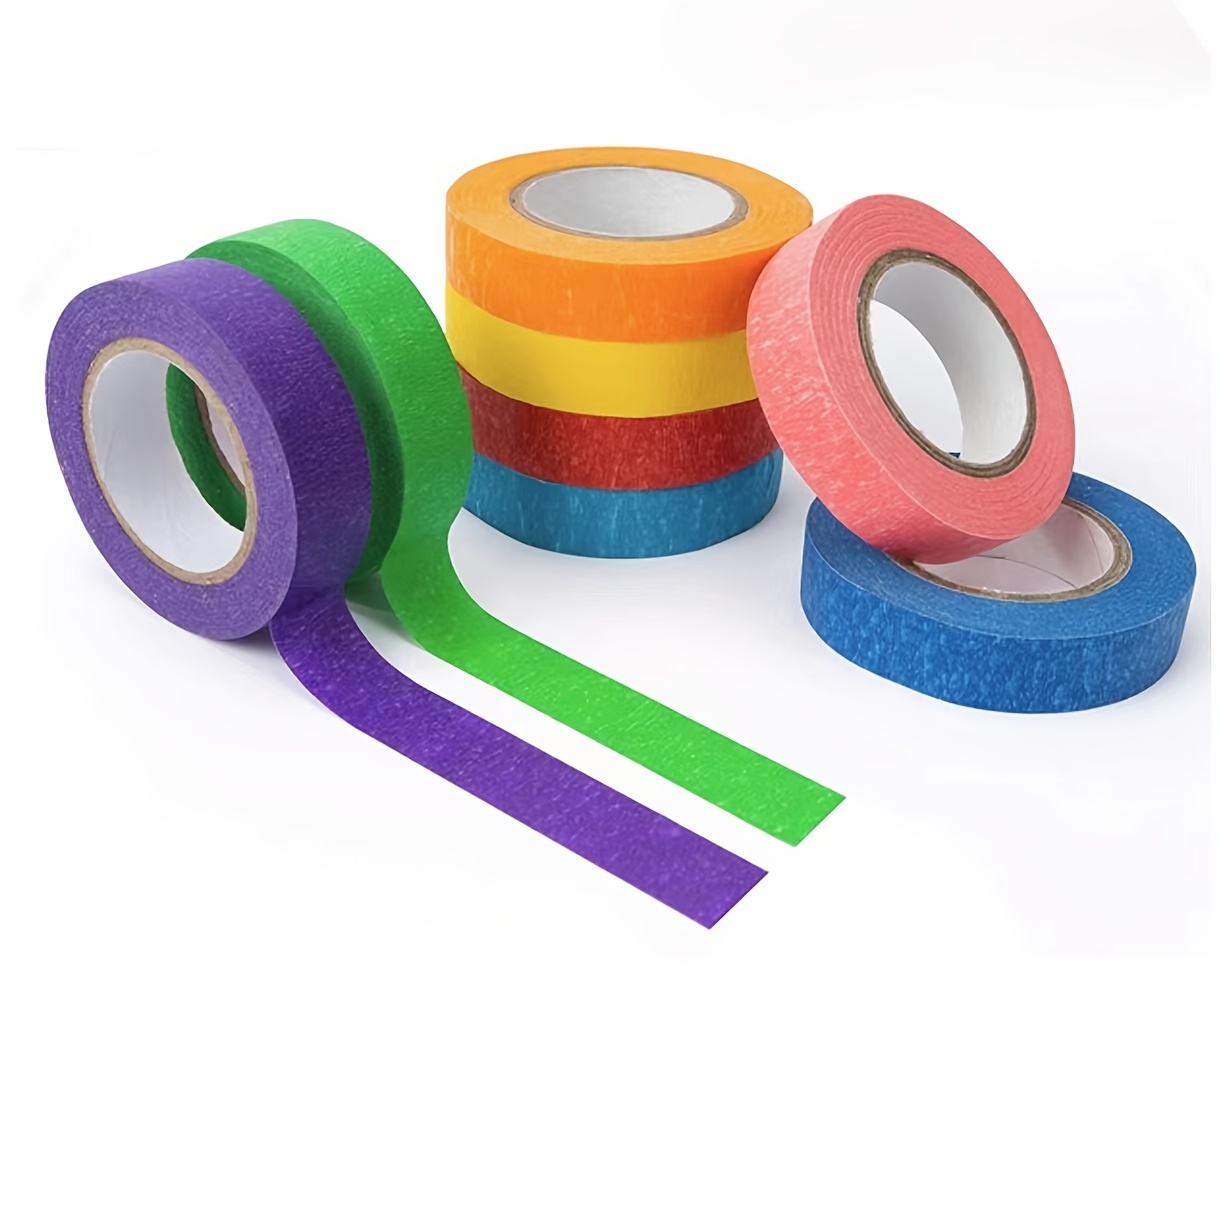 Color Masking Tape Rolls-7 Rolls 2.54 Cm X 20 Yards (approximately 20  Meters)-color Teacher Tape, Suitable For Art, Labels, Classroom Decoration,  Chil